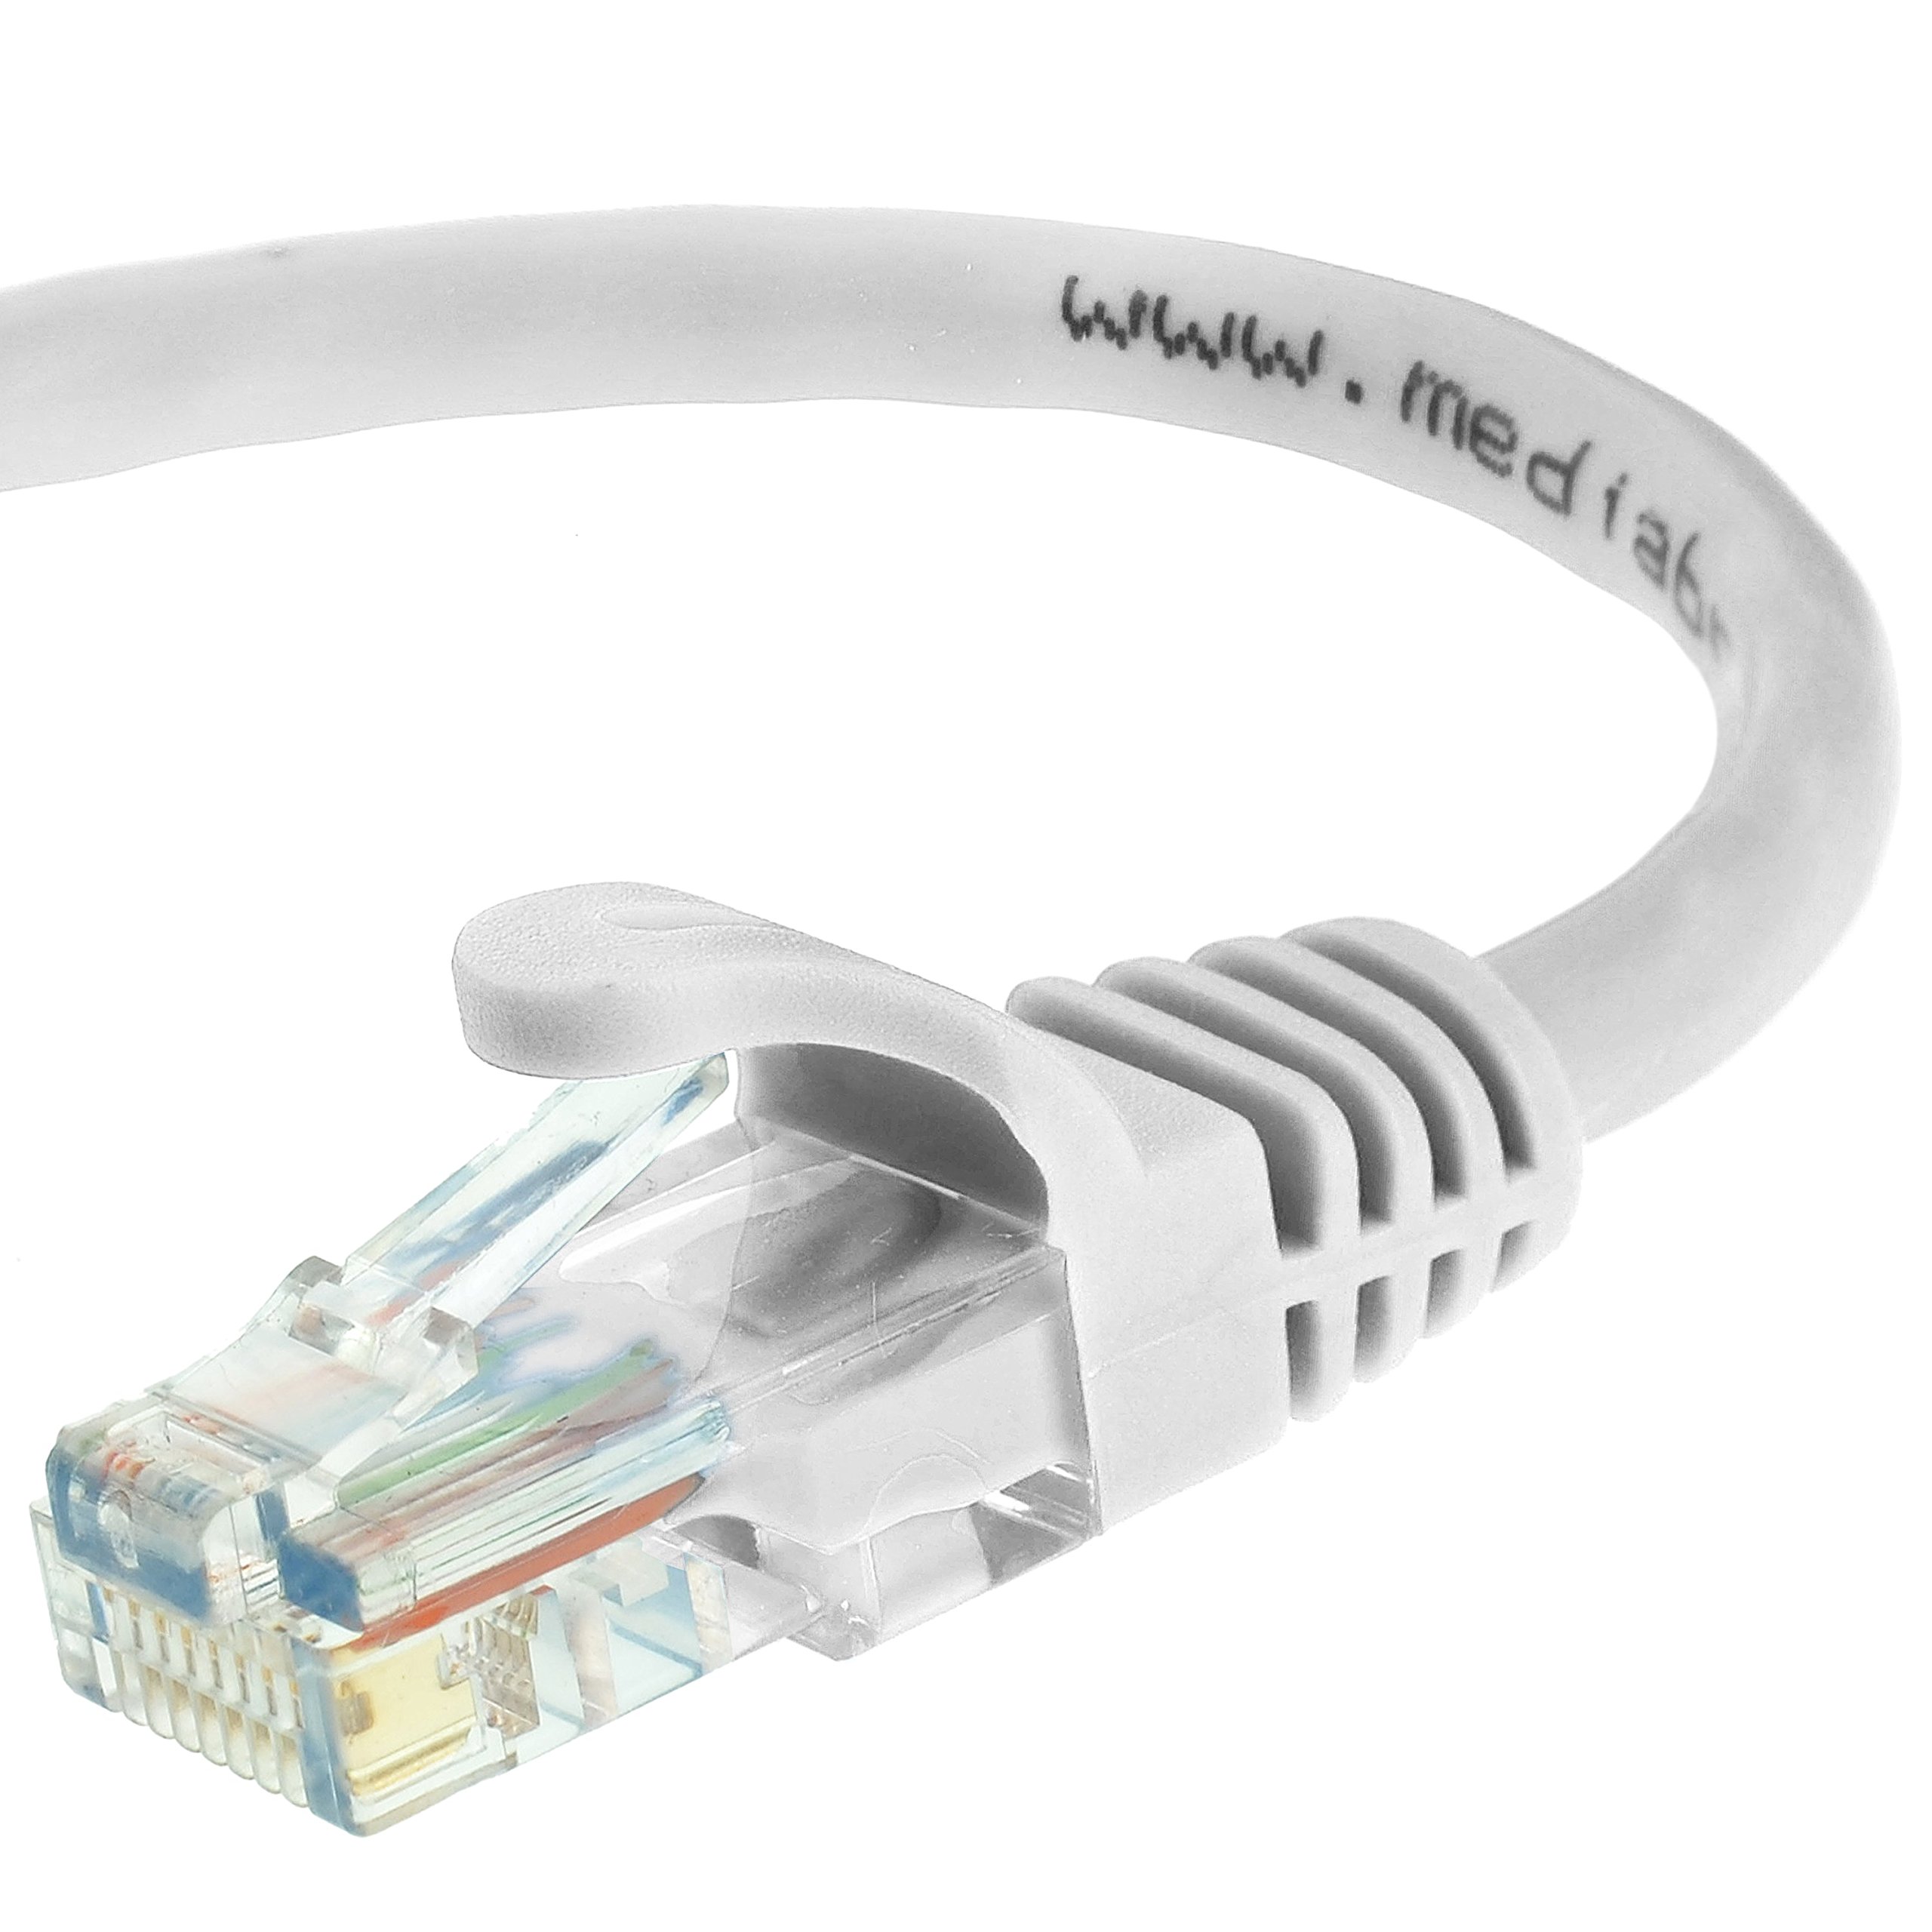 Book Cover Mediabridge™ Ethernet Cable (15 Feet) - Supports Cat6 / Cat5e / Cat5 Standards, 550MHz, 10Gbps - RJ45 Computer Networking Cord (Part# 31-299-15B)